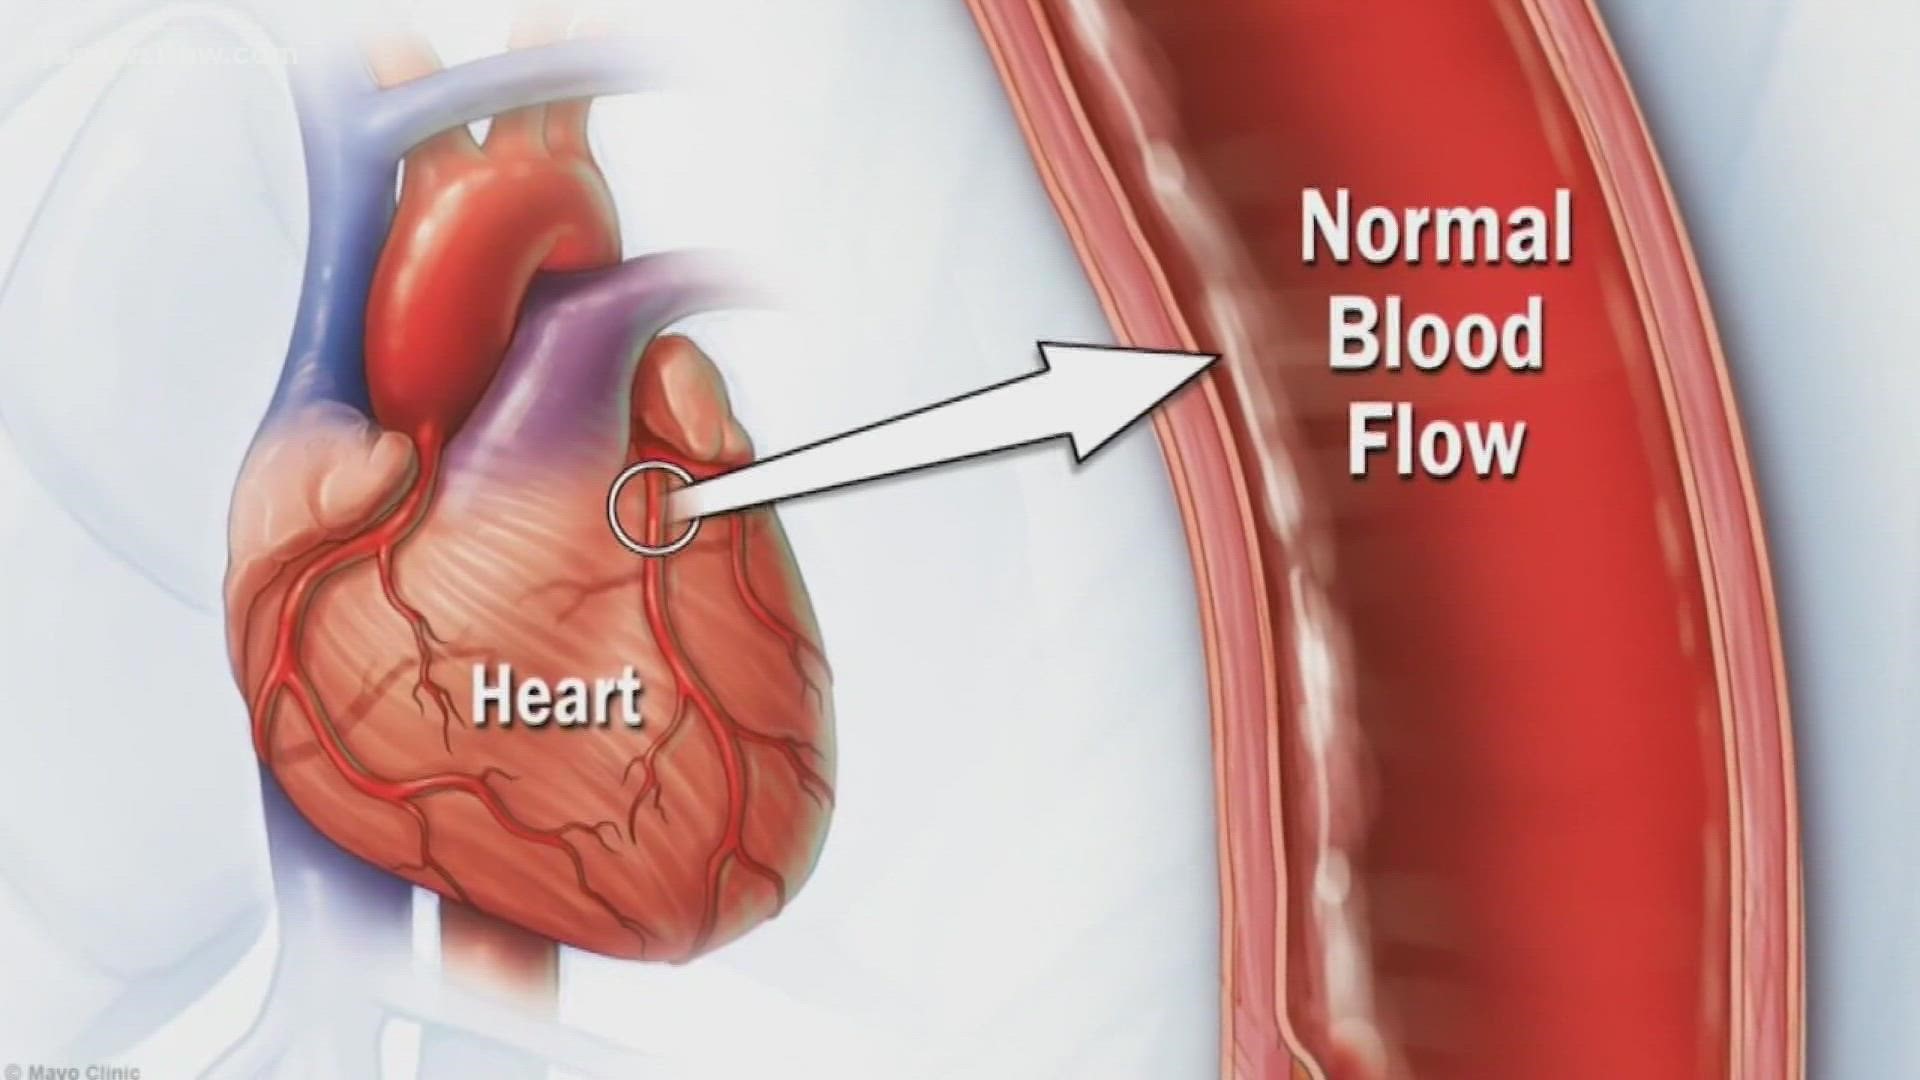 Coronary artery disease is the most common heart condition. More than 20 million people have it and more than 350,000 Americans have died from it